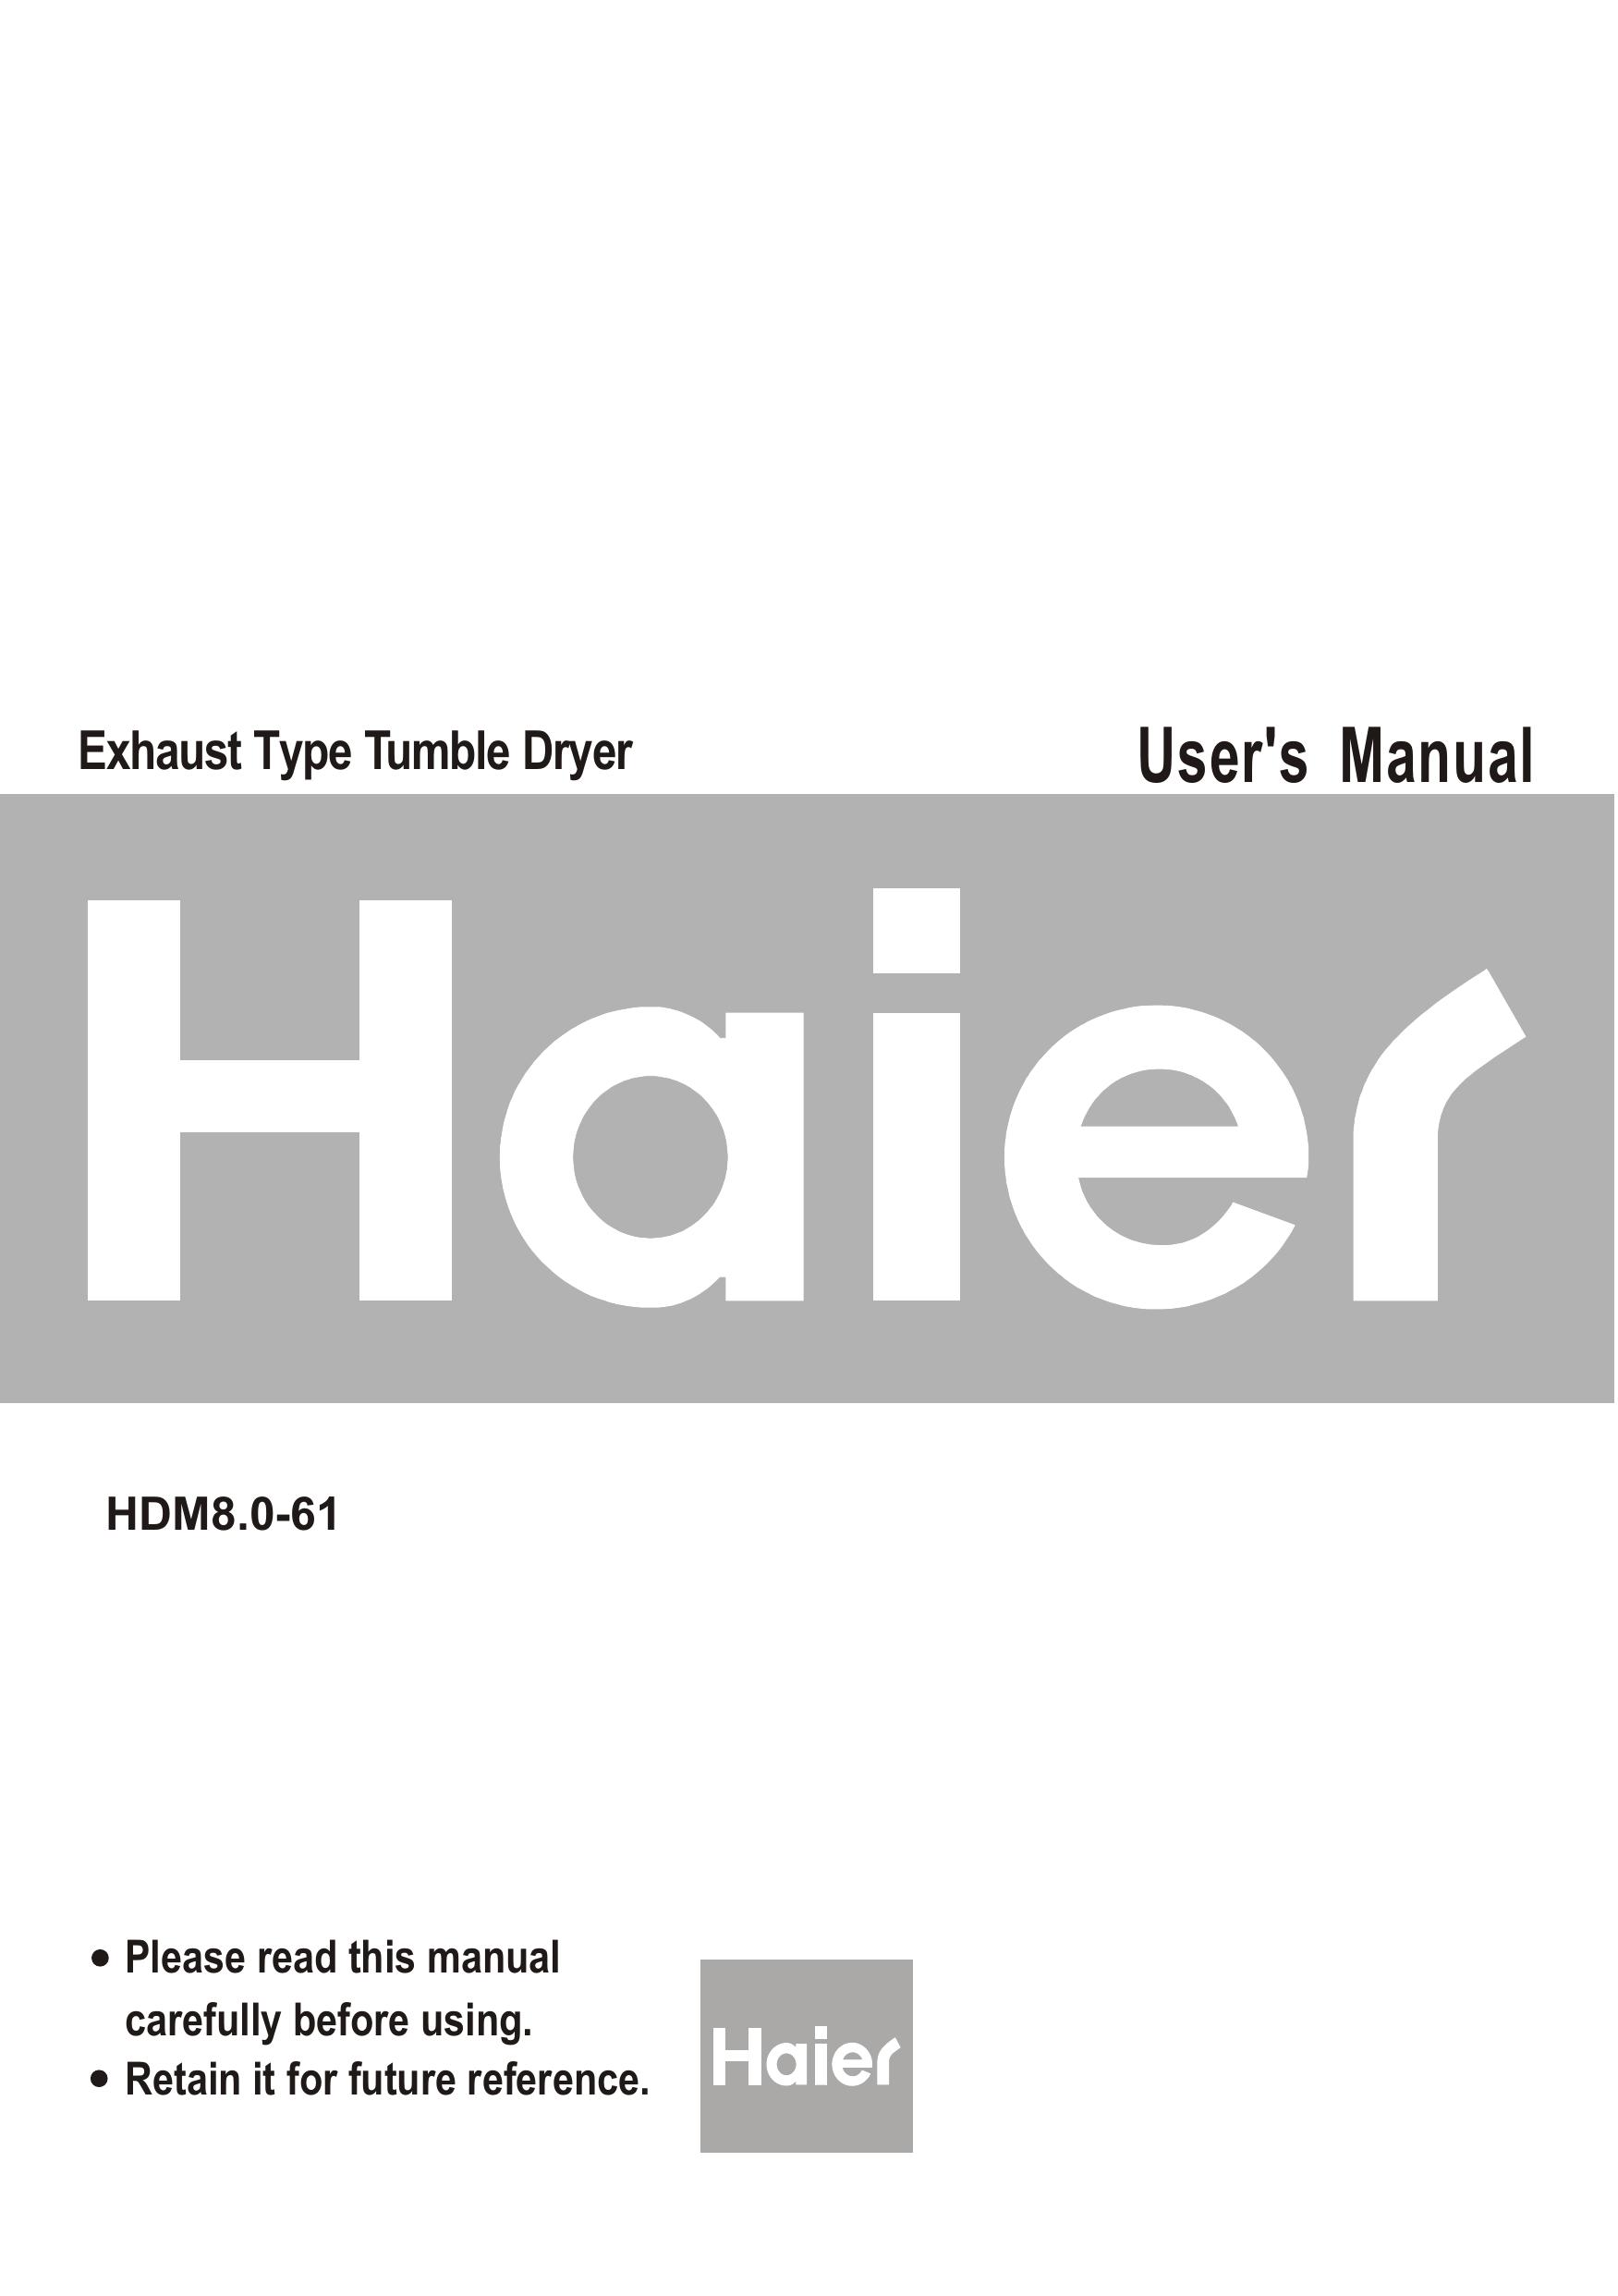 Haier HDM8.0-61 Clothes Dryer User Manual